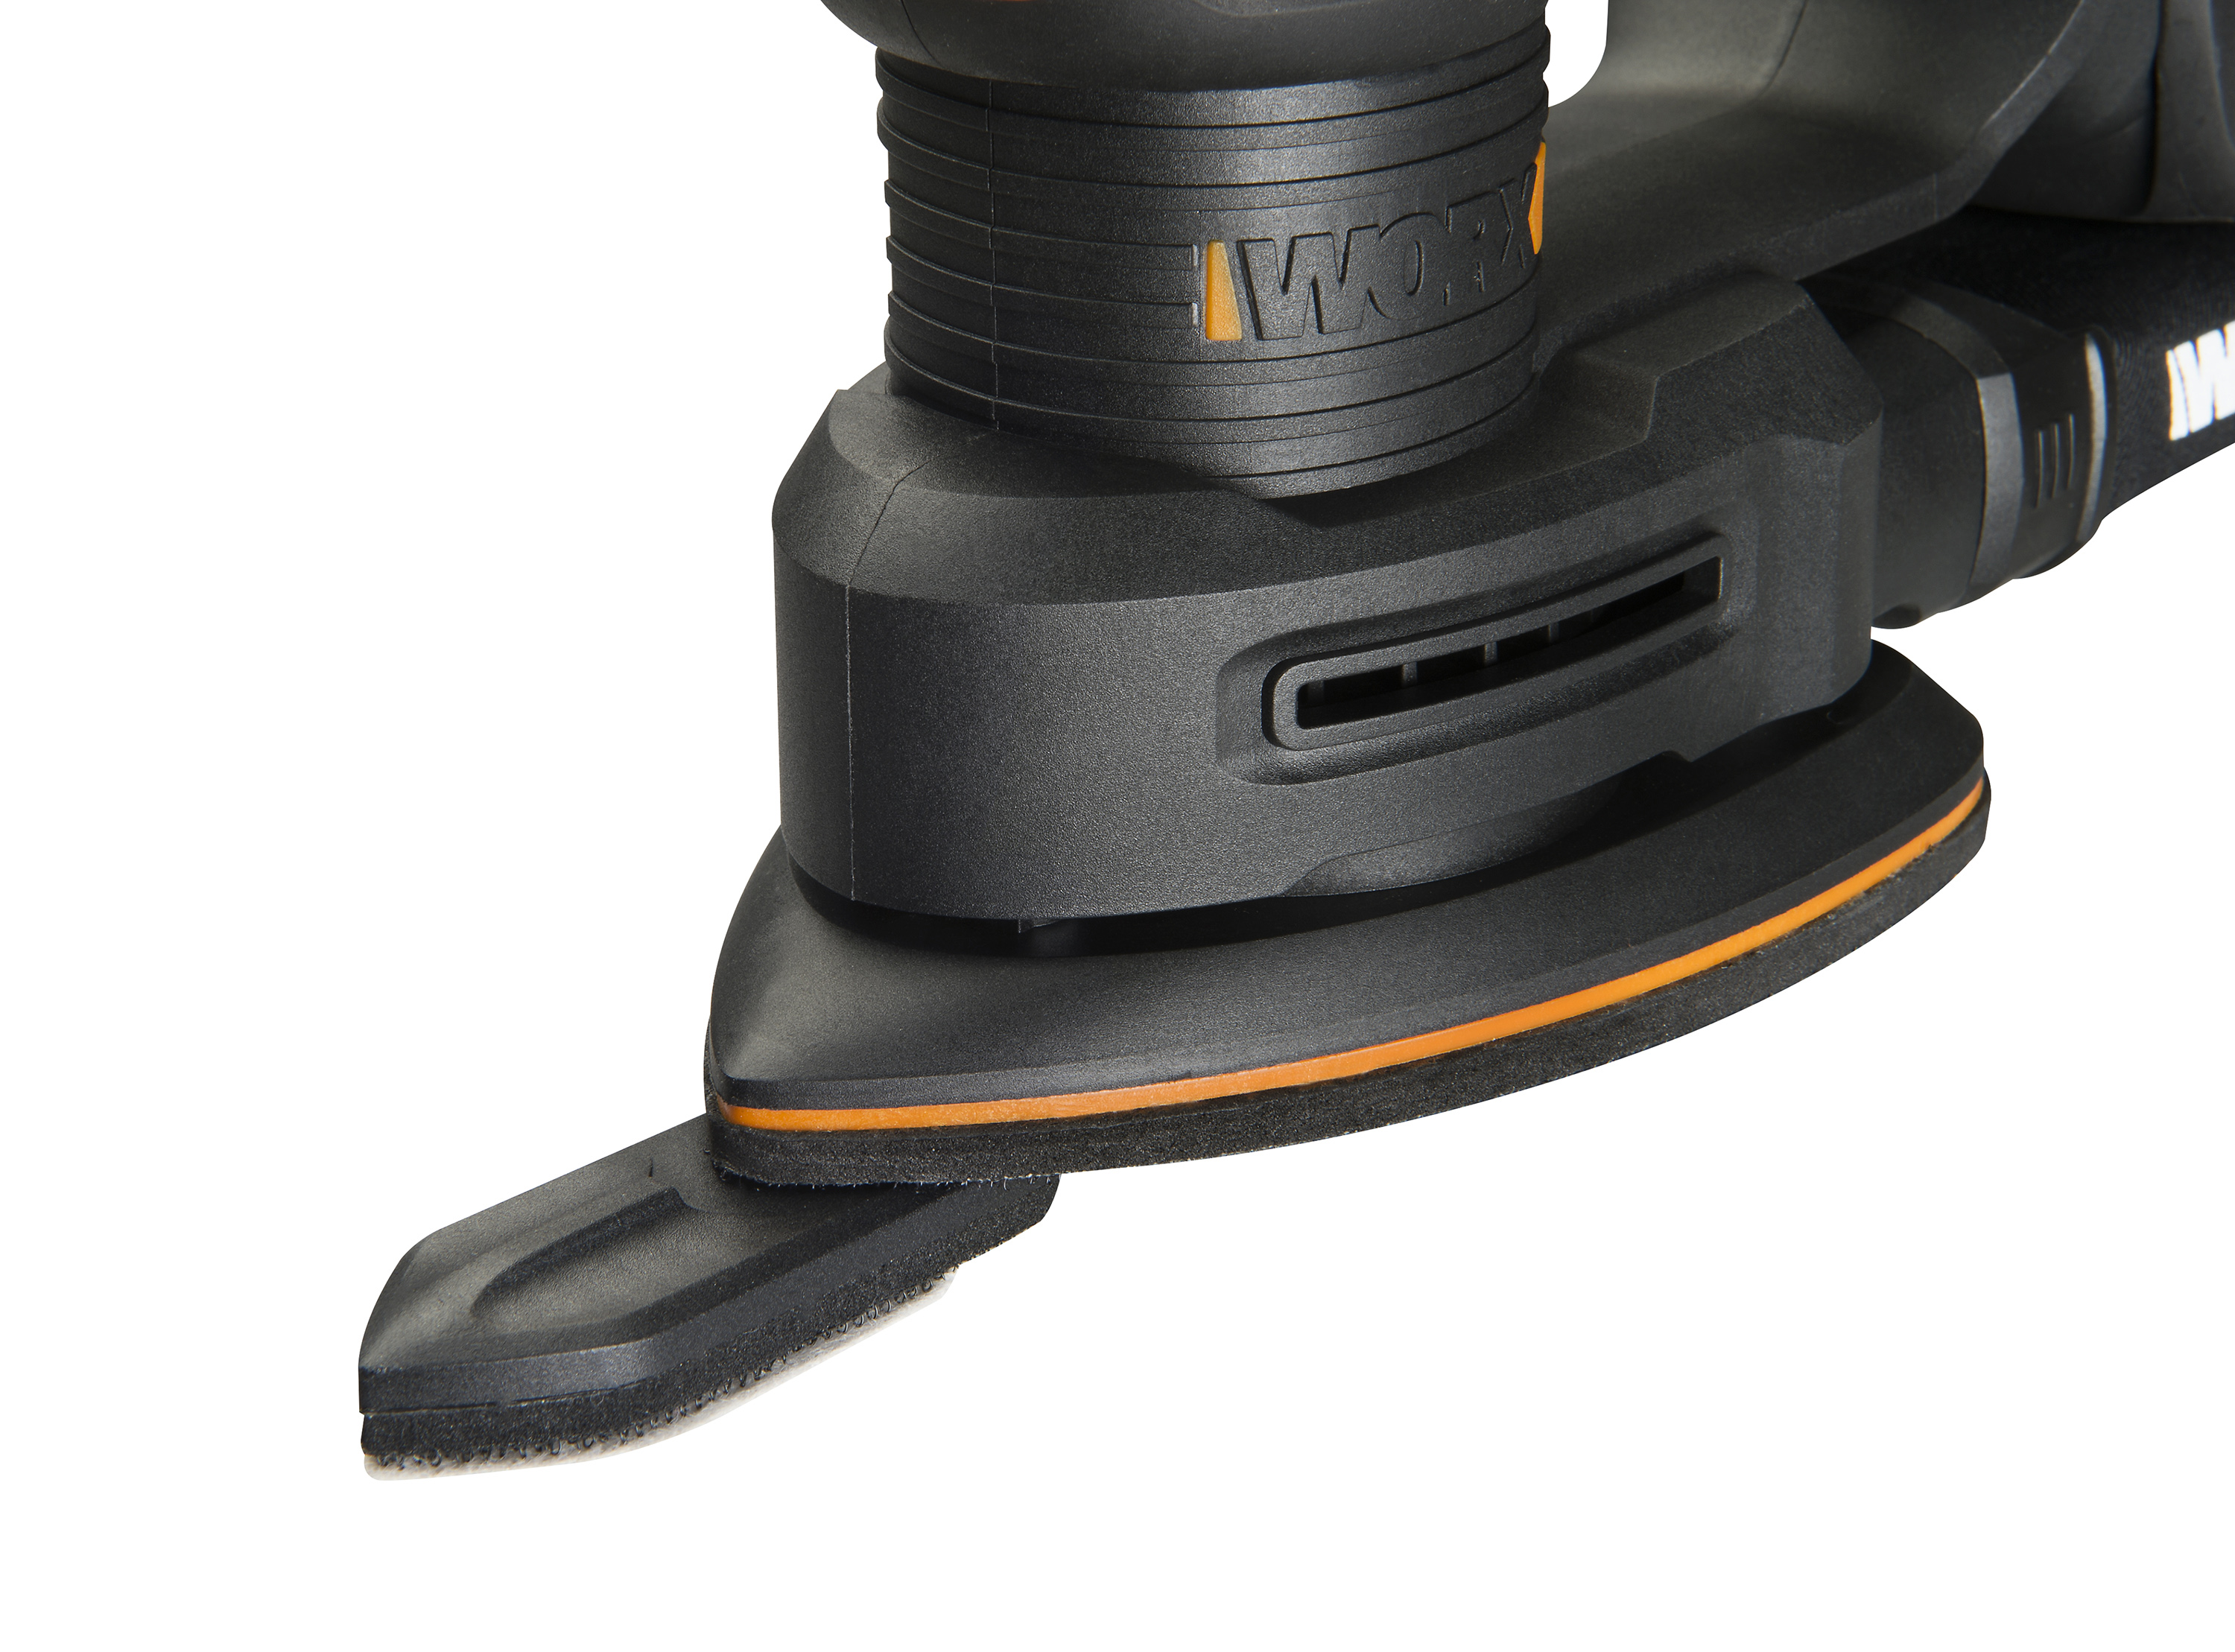 WORX 20V Power Share Detail Sander with finger sanding attachment in place.